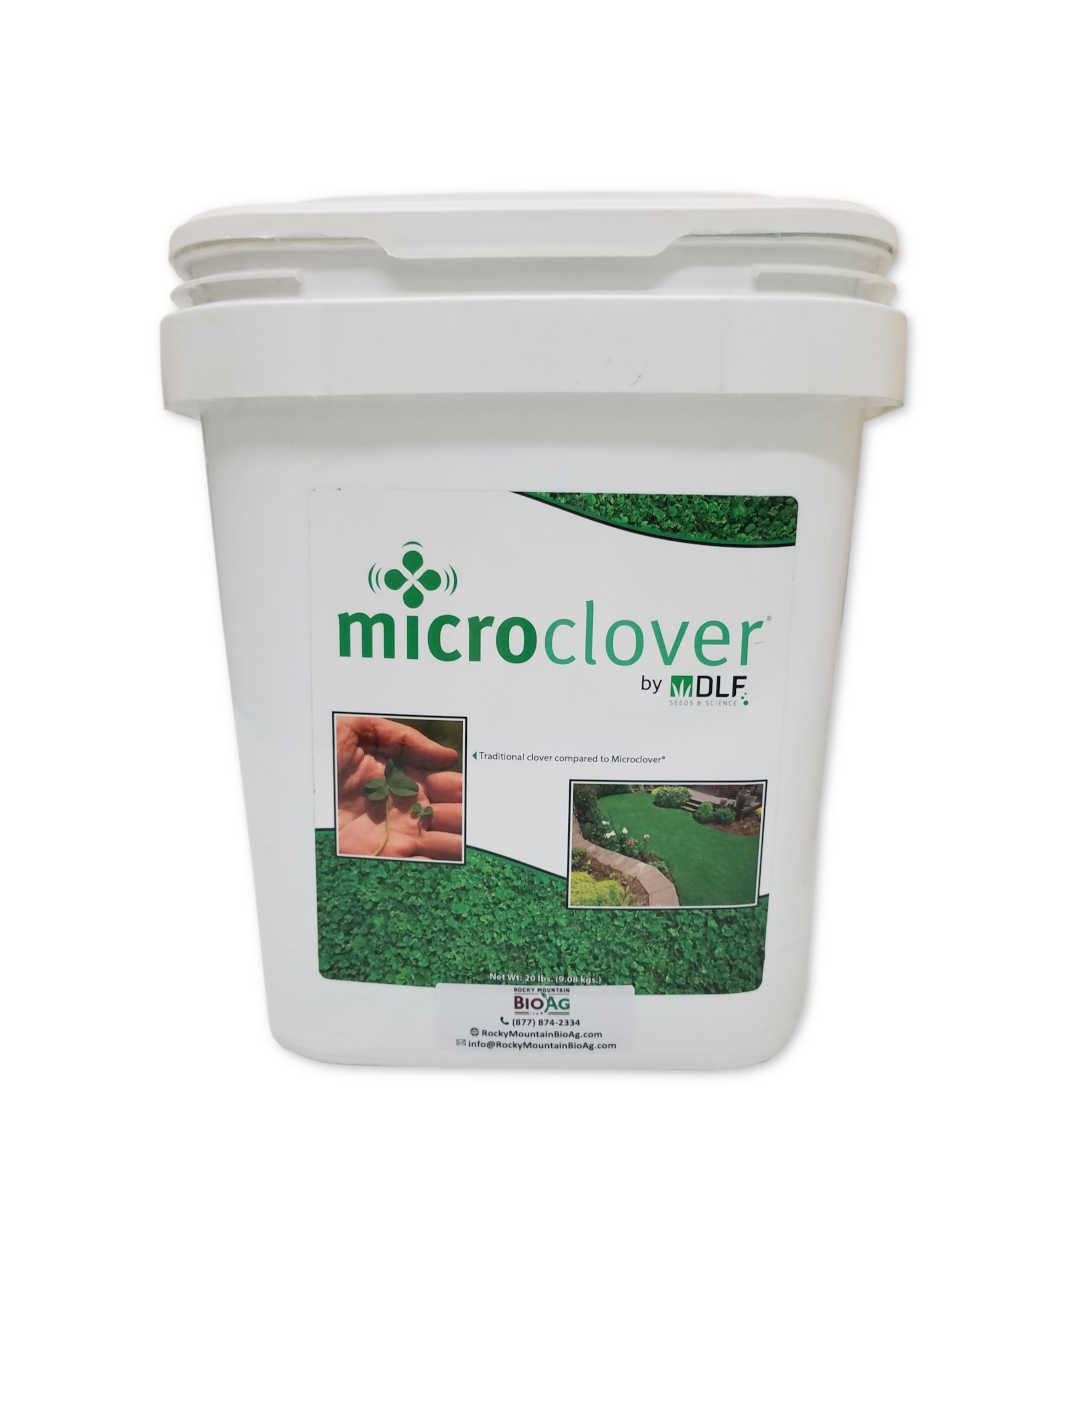 20lb Pail of Micro Clover Lawn Seed